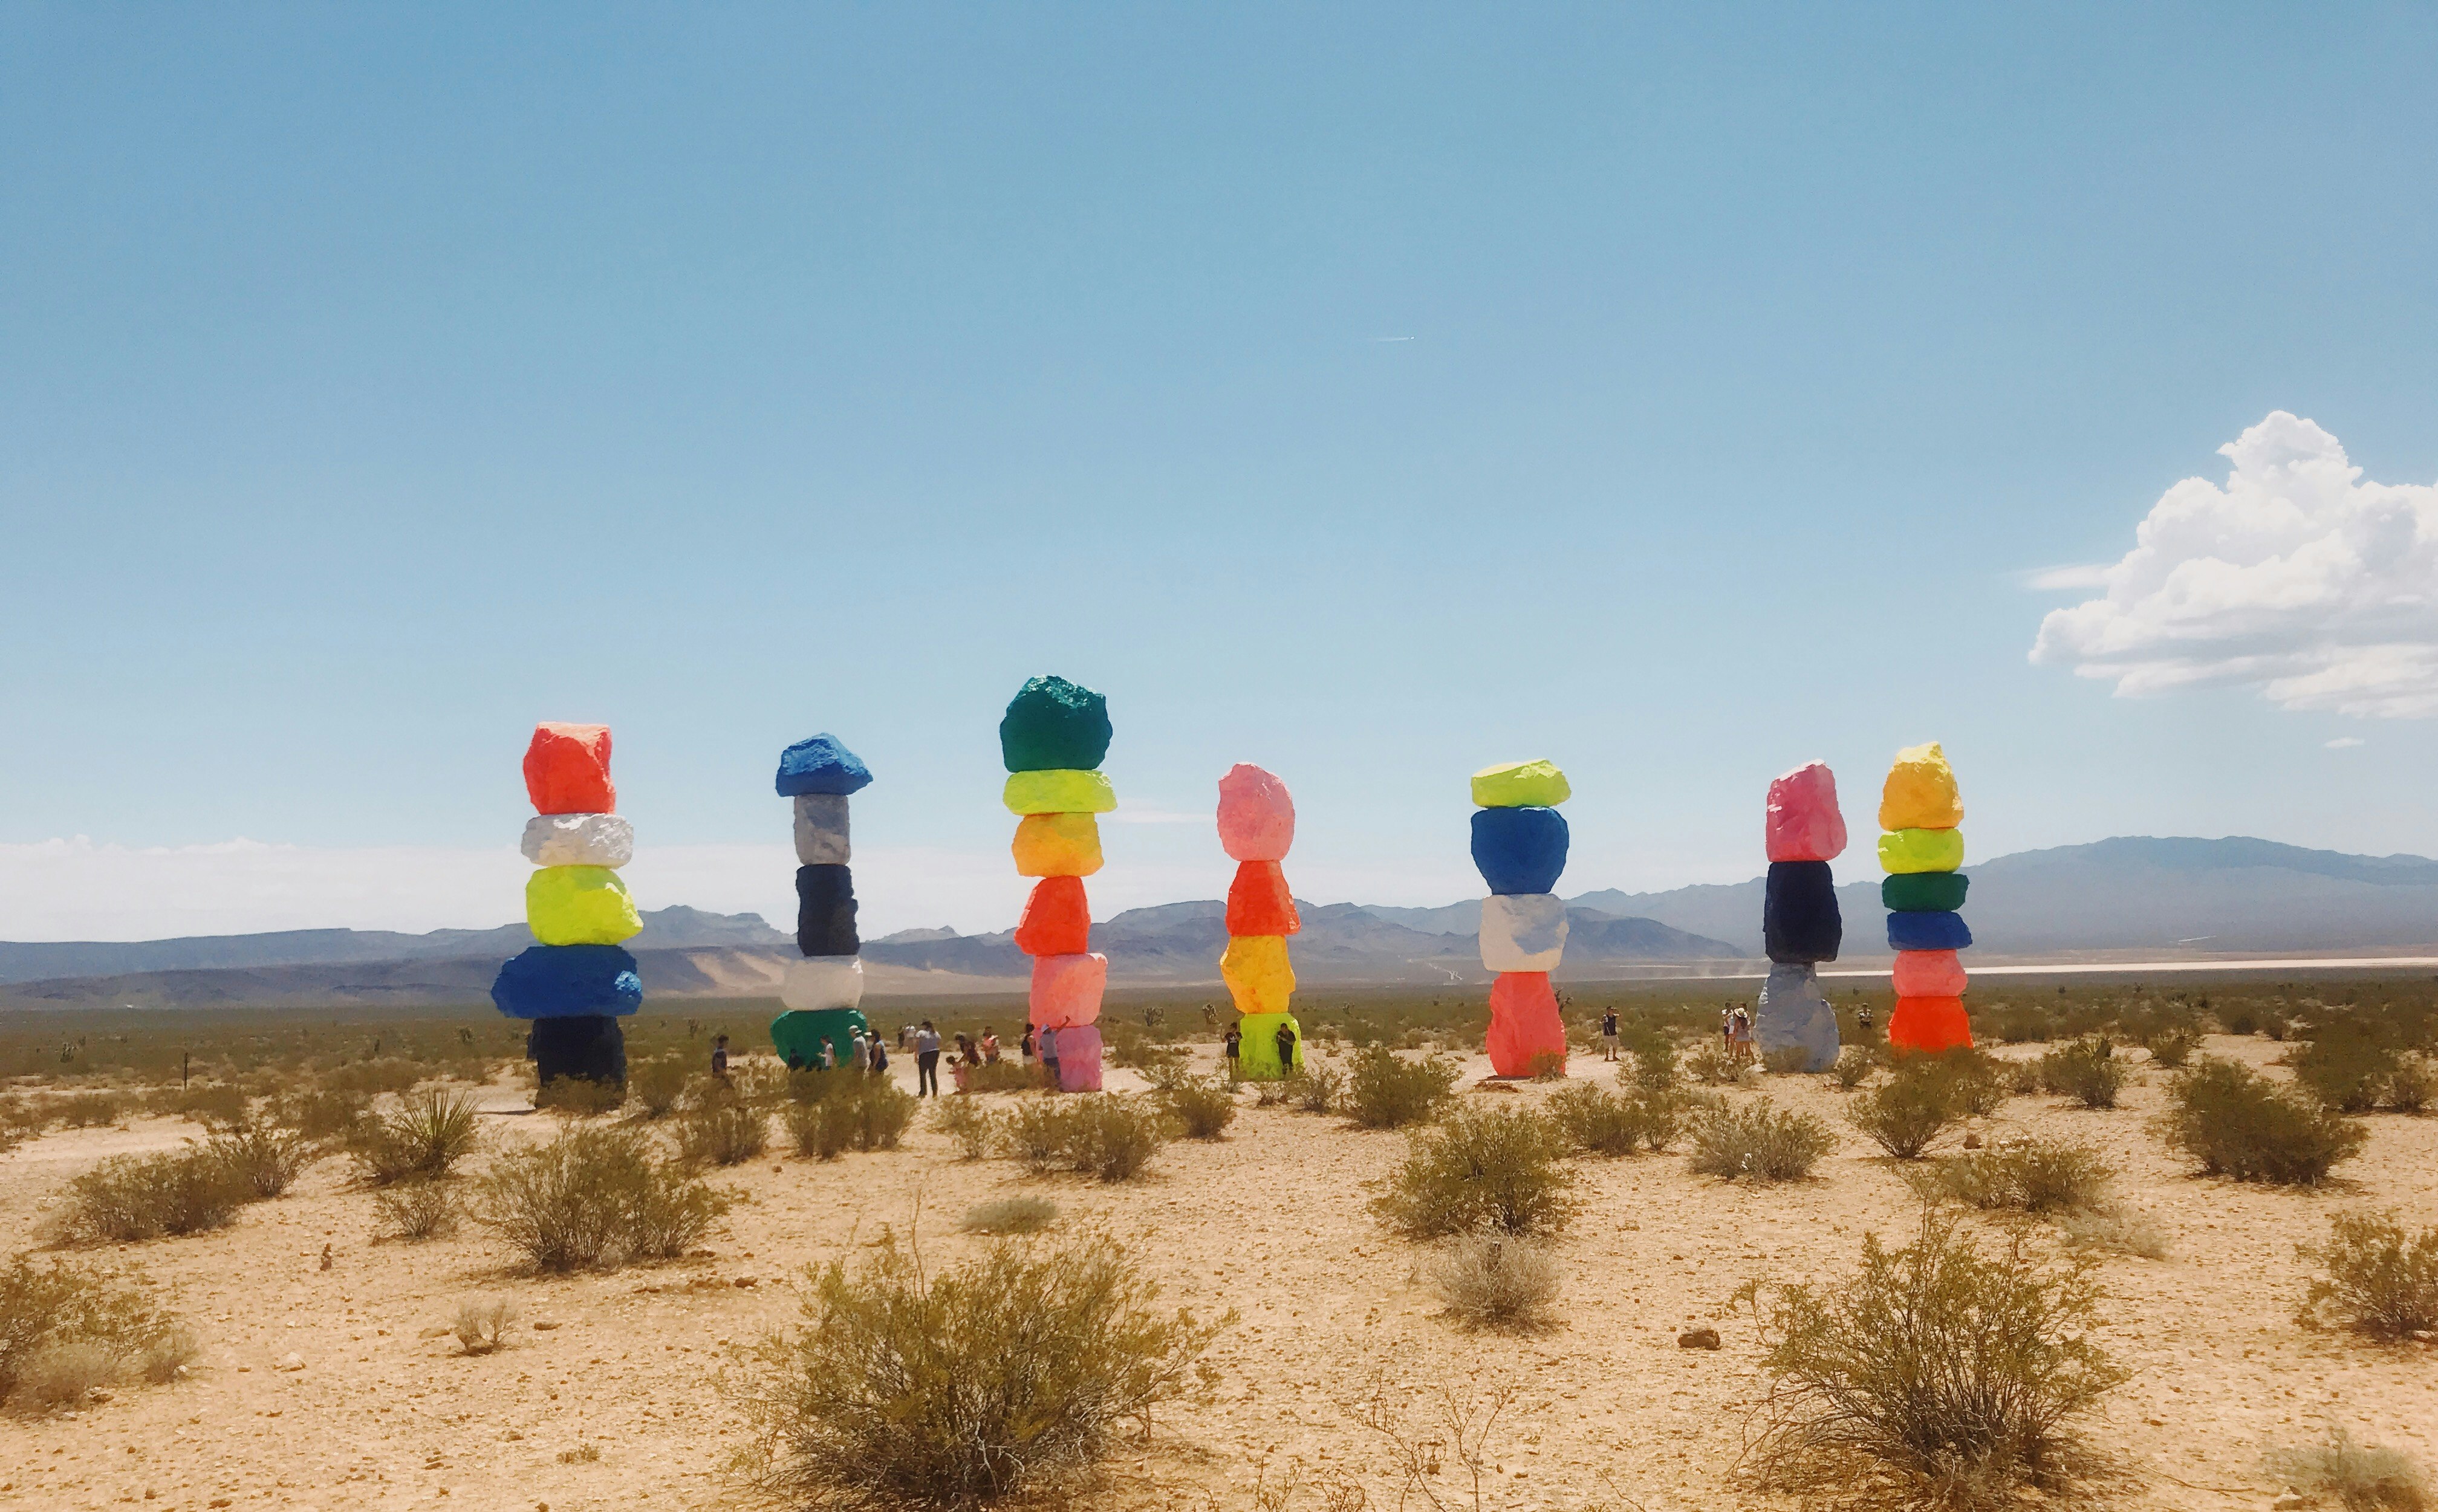 assorted-color balloon stonehenge at the desert during daytime